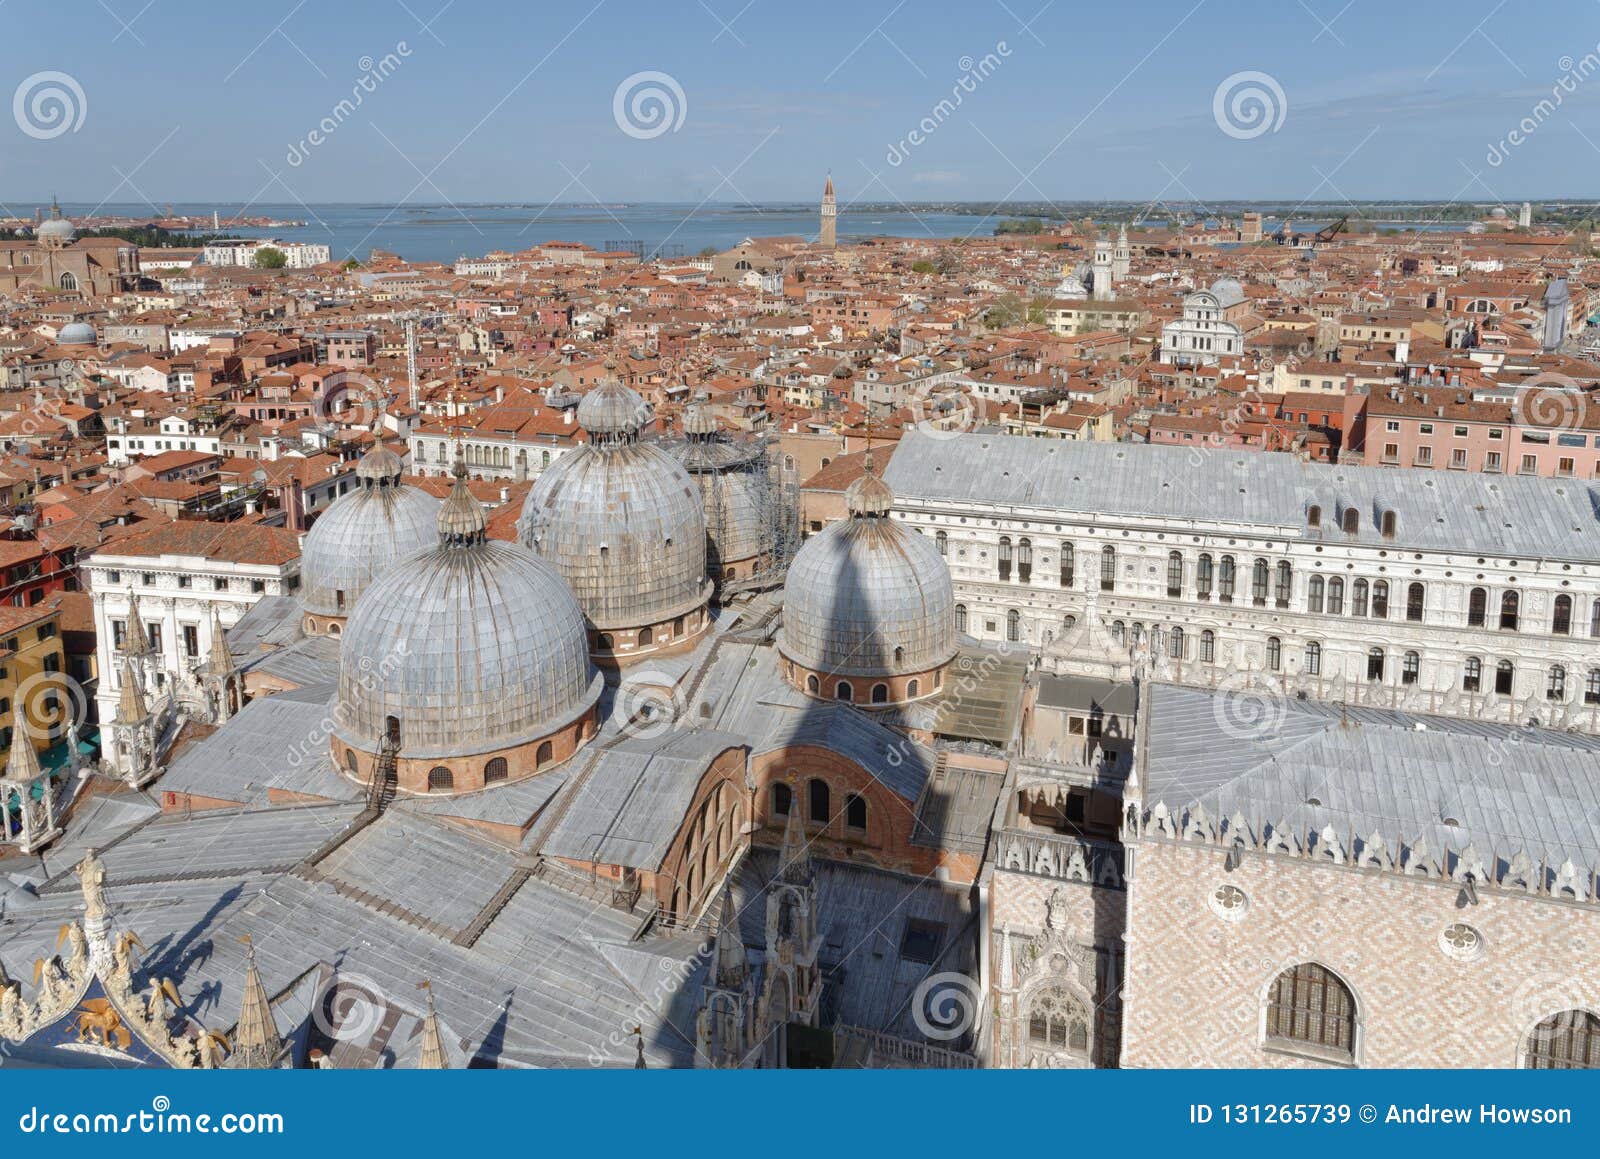 The Basilica Of San Marco In St Marks Square In Venice